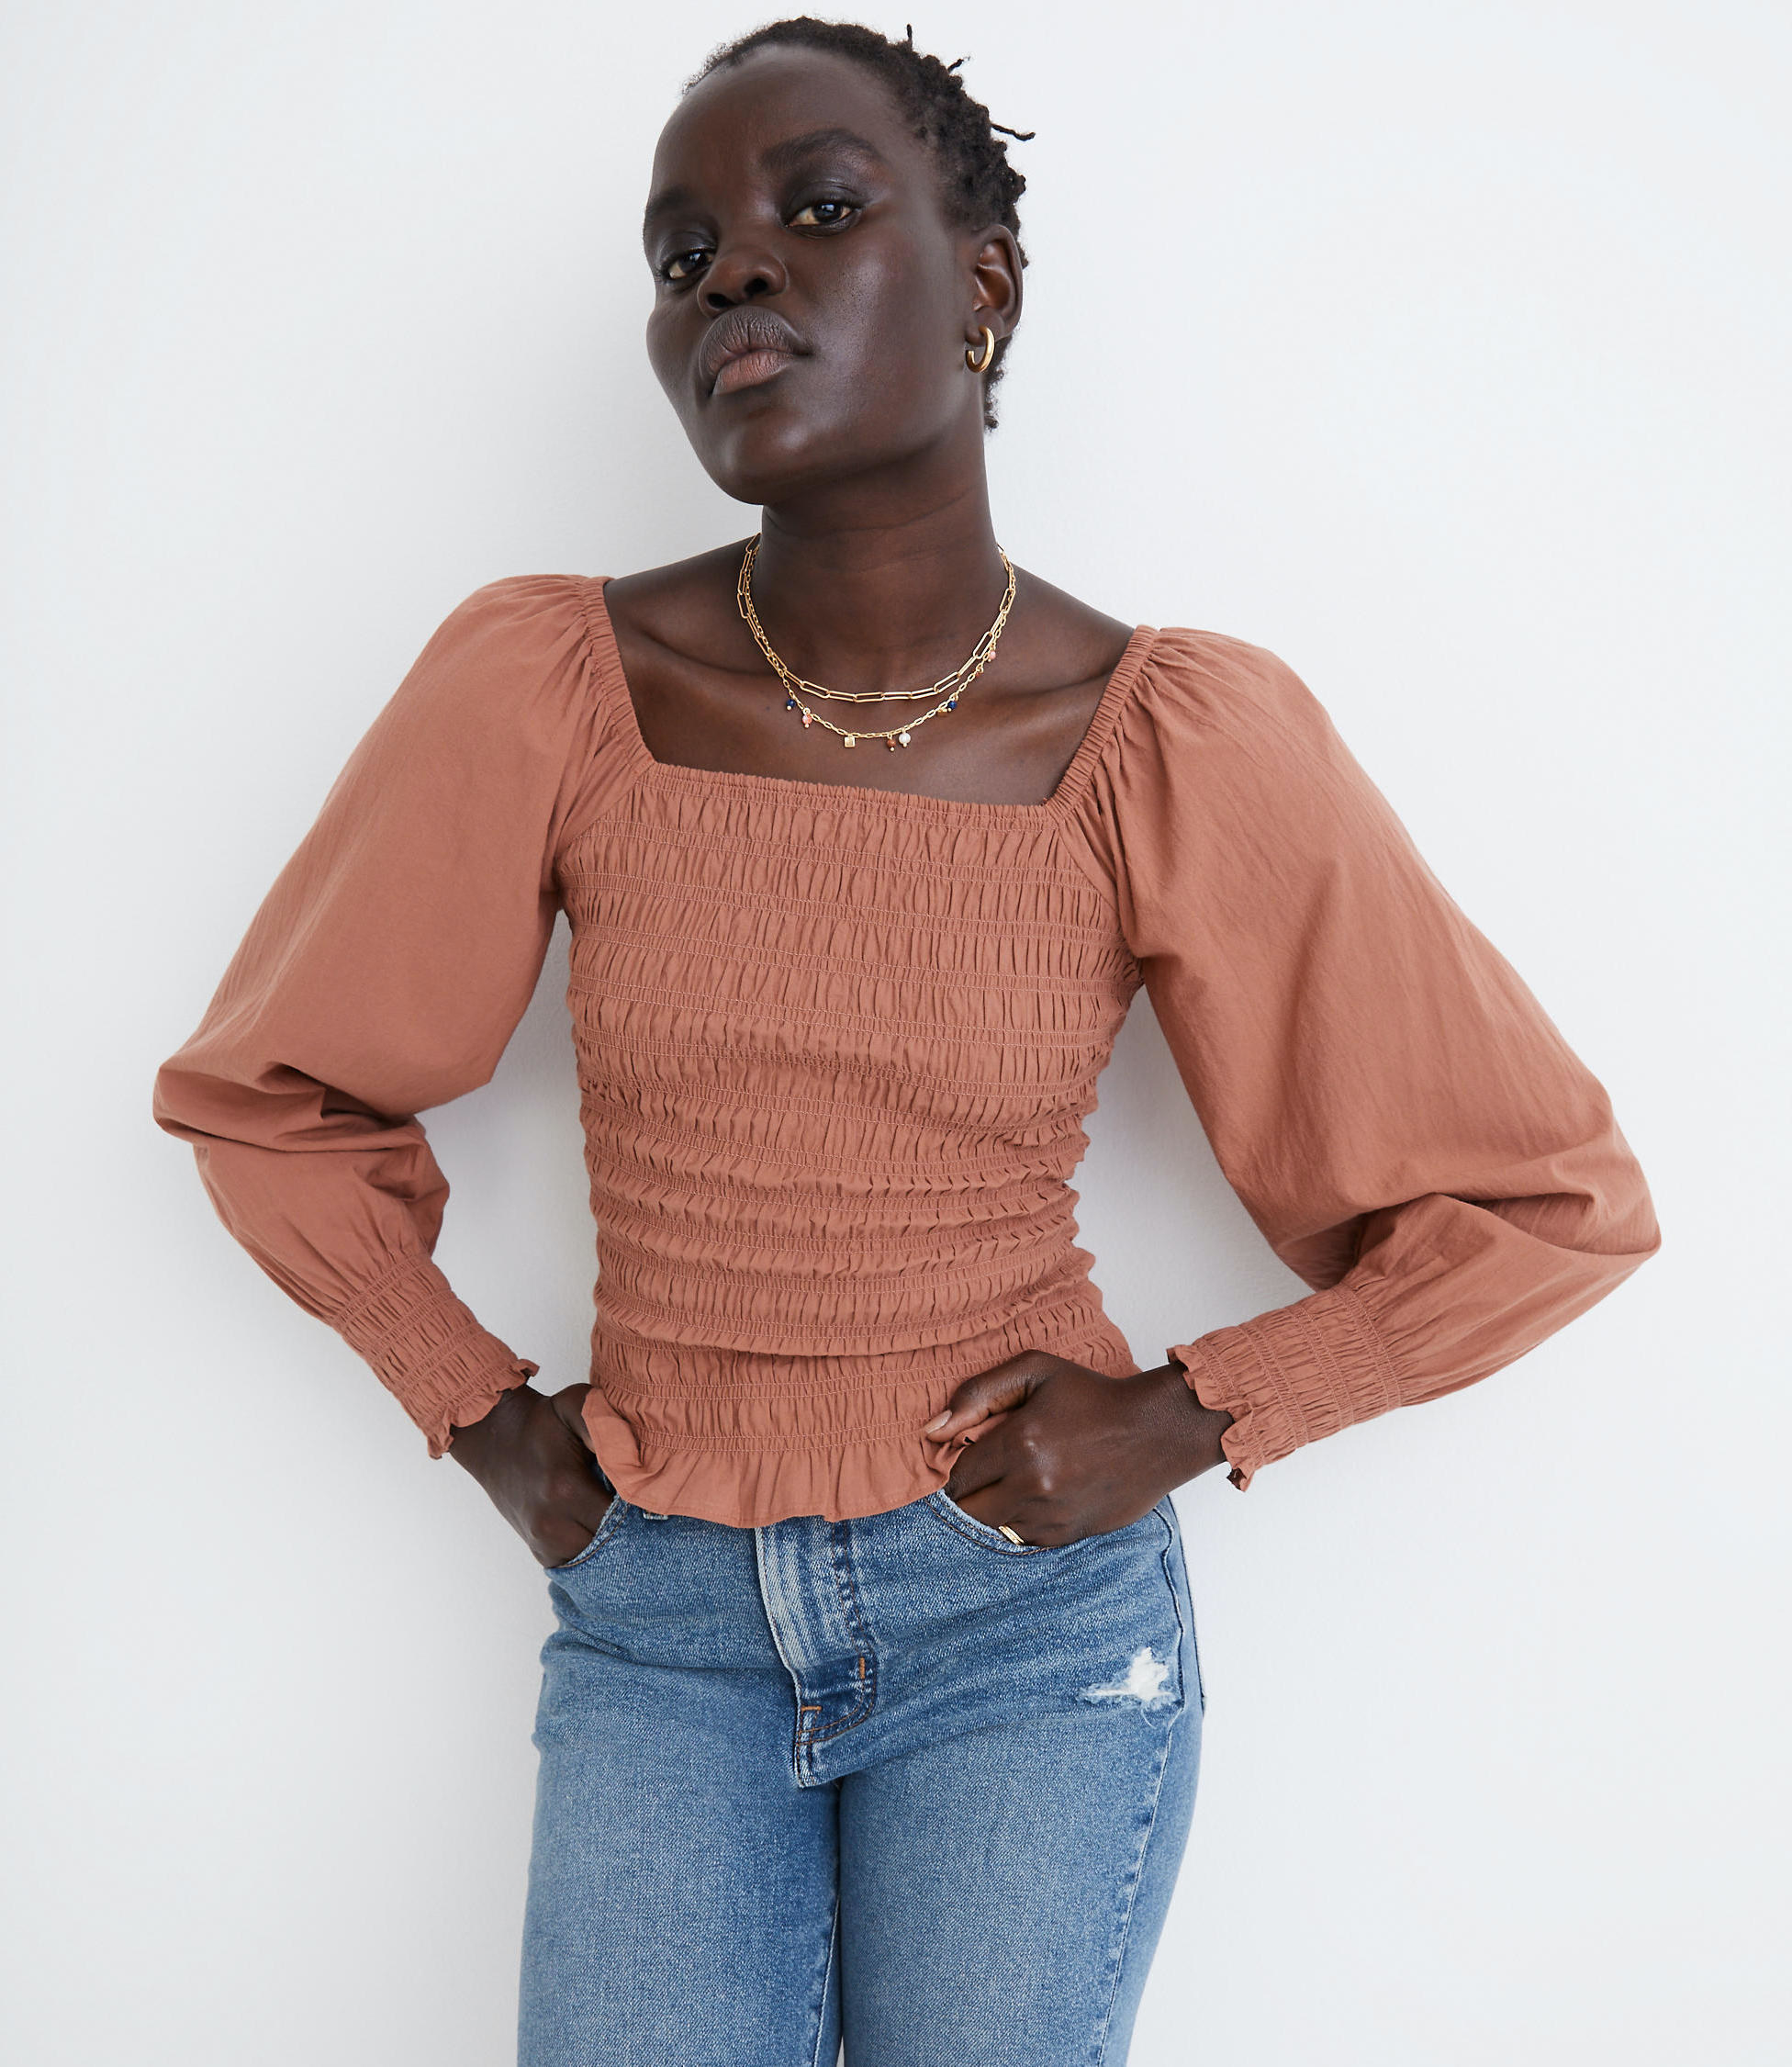 Model wearing orange top with jeans